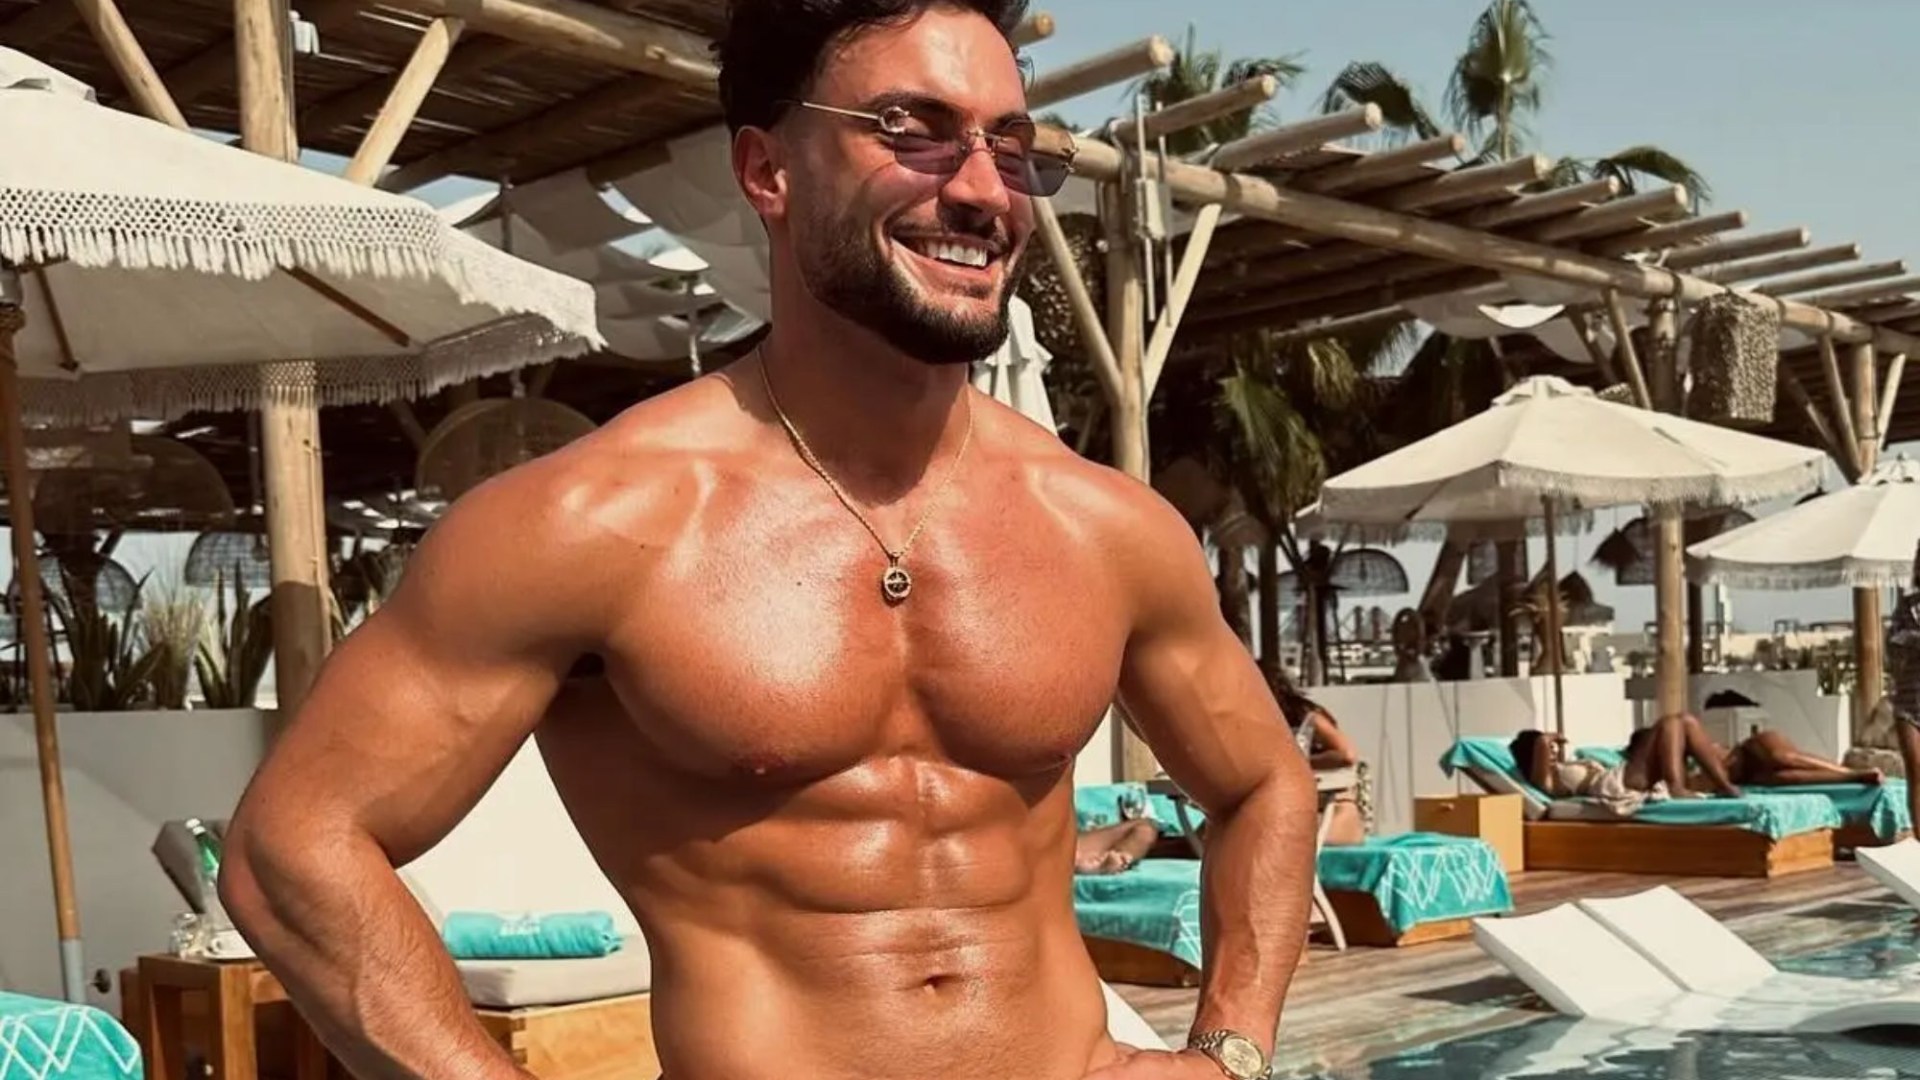 Love Islands Davide in massive career U-turn after missing out on CBB place to ex Ekin-Su [Video]